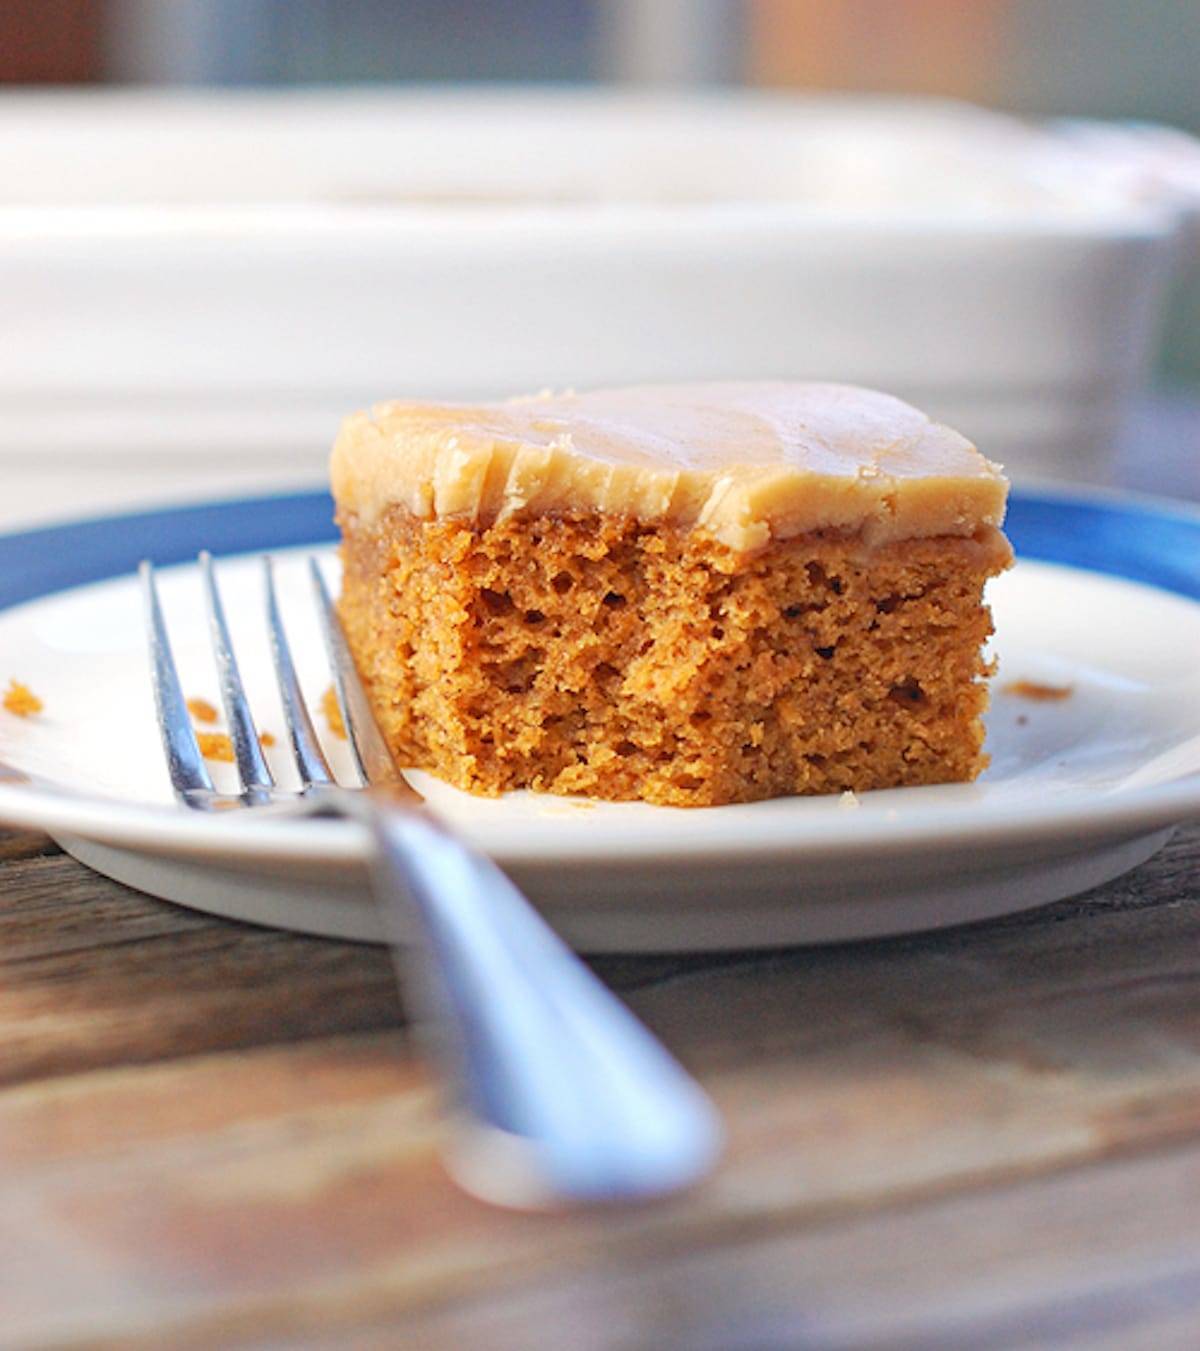 Pumpkin bar topped with this old-fashioned caramel frosting on a plate with a fork.